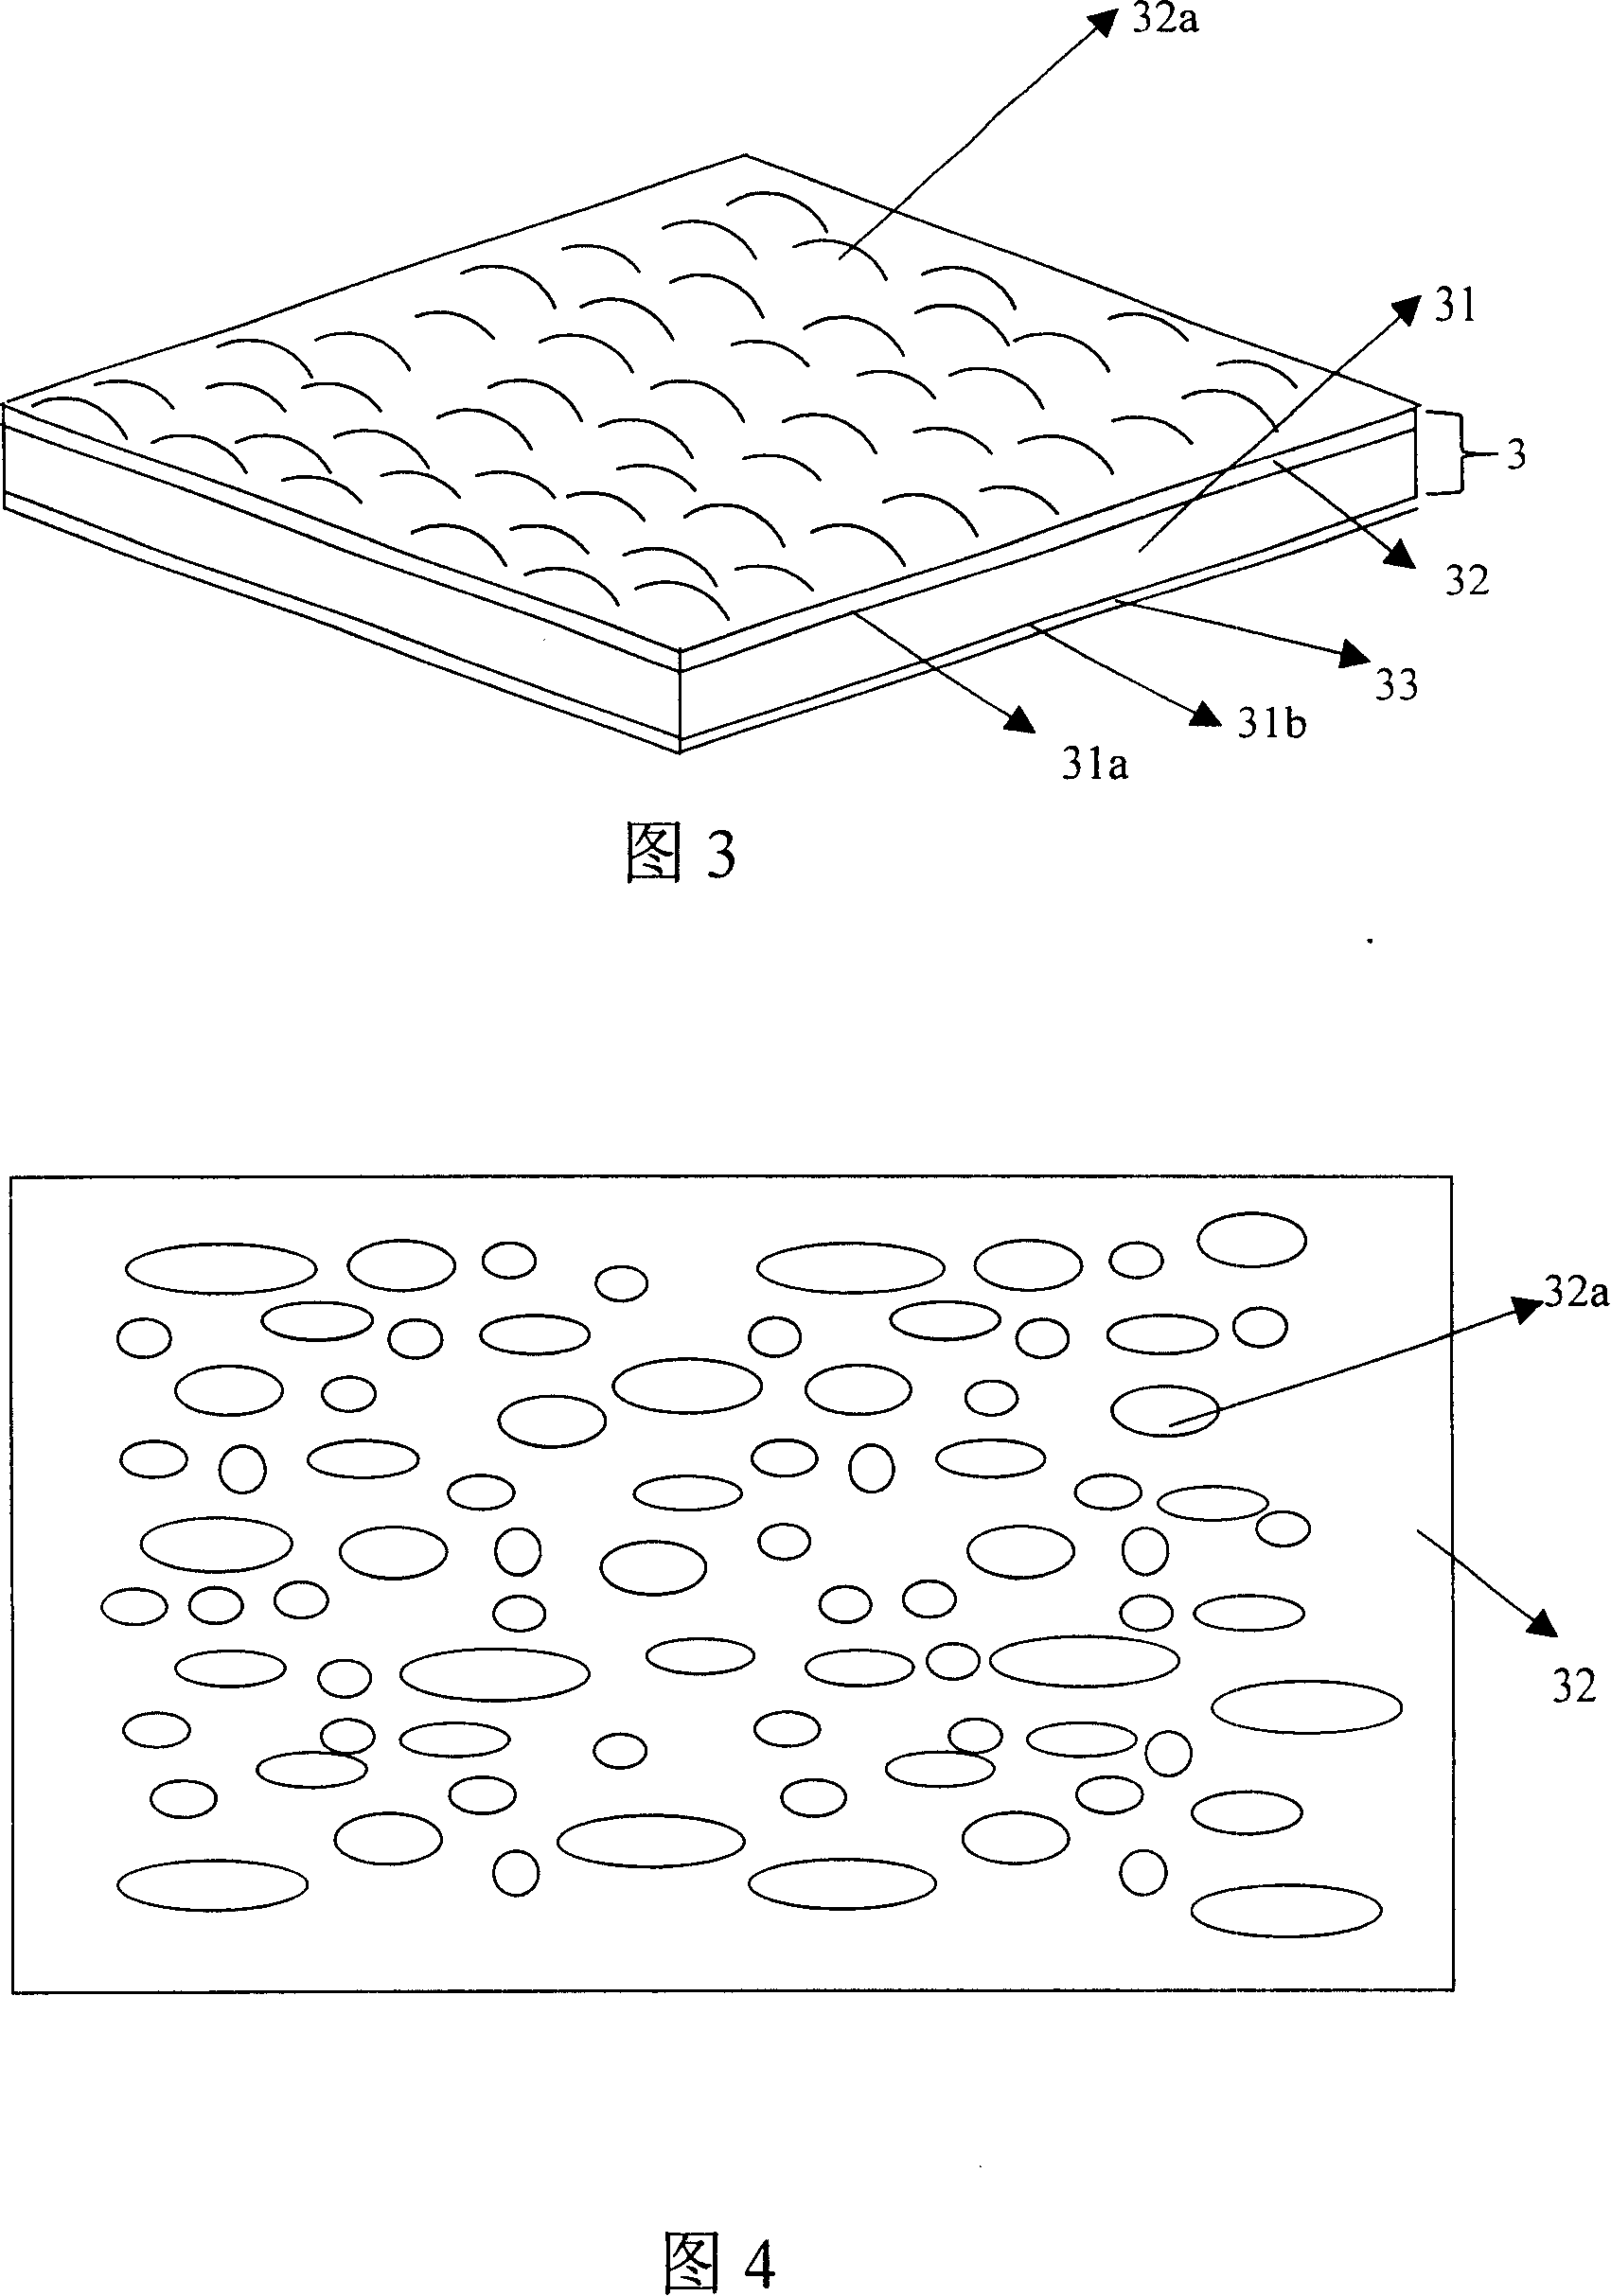 Optical diaphragm structure with light scattering and concentration function